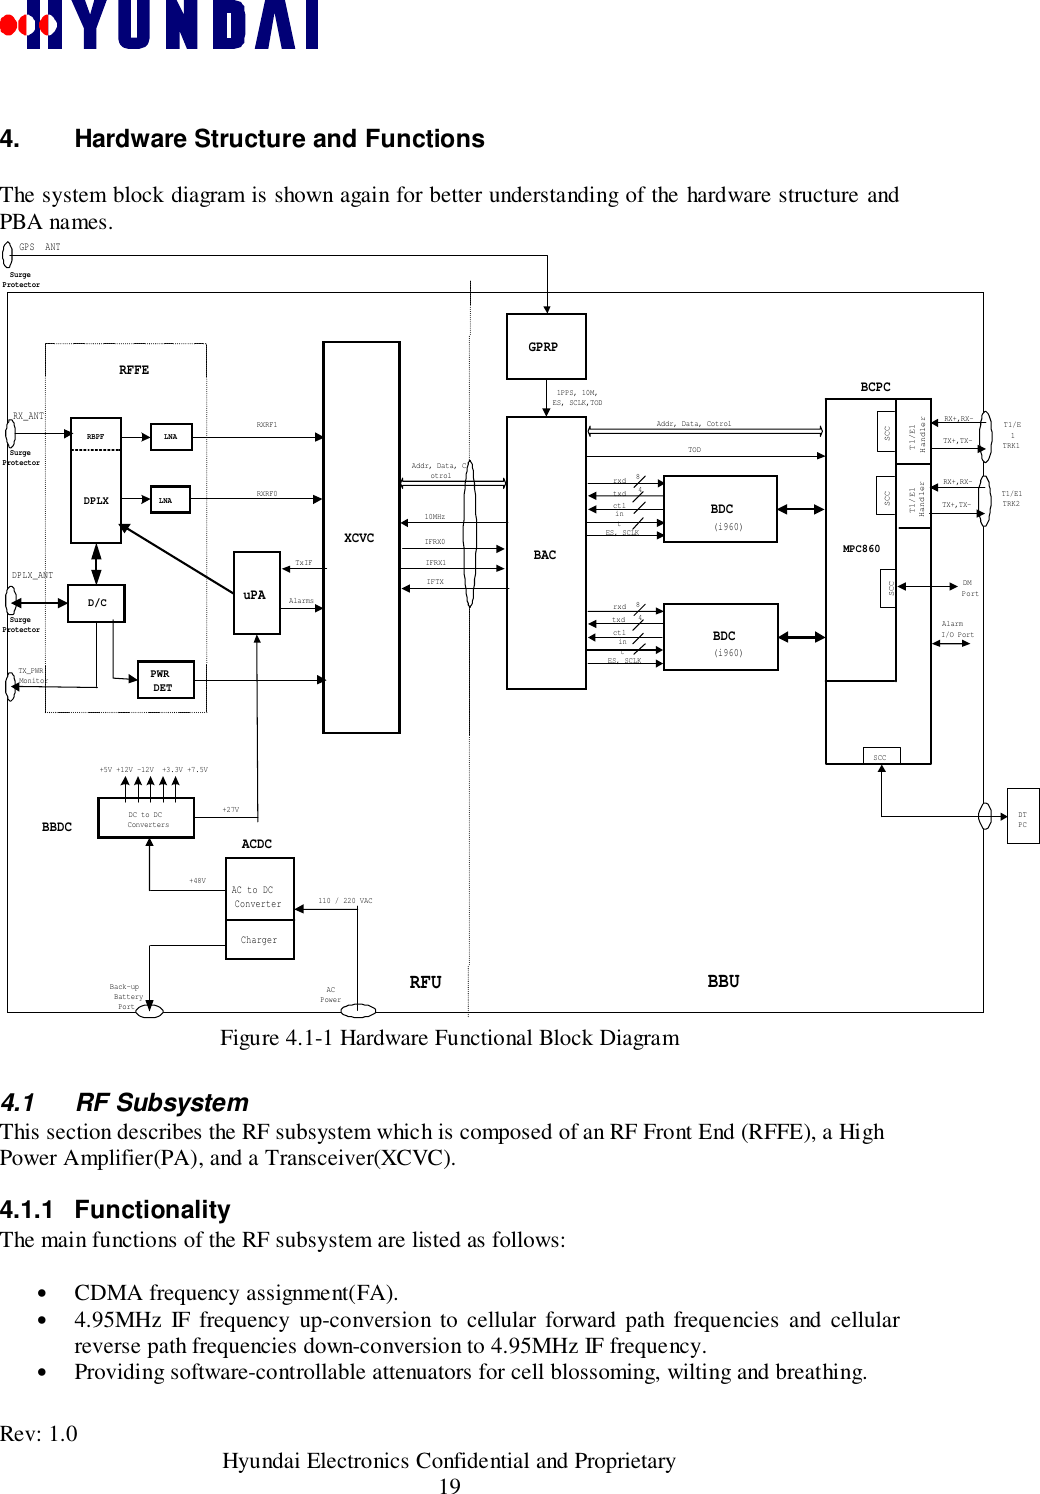 Rev: 1.0                                           Hyundai Electronics Confidential and Proprietary194.  Hardware Structure and FunctionsThe system block diagram is shown again for better understanding of the hardware structure andPBA names.RX_ANTDPLX_ANTXCVCIFRX0IFRX1IFTXuPAGPS  ANT BDCBDCBCPCMPC860(i960)DC to DC ConvertersBBDCACDC110 / 220 VACRFU BBUDPLXRFFEDTPC48rxdtxdctlint84ES, SCLKDMPort1PPS, 10M, ES, SCLK,TODRXRF1RXRF0TxIFBACtxdctlrxdintES, SCLKRBPFD/CGPRP+5V +12V -12V  +3.3V +7.5V    Addr, Data, CotrolAddr, Data, CotrolAlarmsTX_PWRMonitorBack-upBatteryPort Alarm I/O PortACPower10MHzTOD(i960)SCCSCCAC to DC  ConverterCharger+27V     +48V     LNALNARX+,RX-TX+,TX-T1/E1HandlerT1/E1TRK1SCCRX+,RX-TX+,TX-T1/E1HandlerT1/E1TRK2SCCSurgeProtectorSurgeProtectorSurgeProtectorPWR DETFigure 4.1-1 Hardware Functional Block Diagram4.1 RF SubsystemThis section describes the RF subsystem which is composed of an RF Front End (RFFE), a HighPower Amplifier(PA), and a Transceiver(XCVC).4.1.1 FunctionalityThe main functions of the RF subsystem are listed as follows:• CDMA frequency assignment(FA).• 4.95MHz IF frequency up-conversion to cellular forward path frequencies and cellularreverse path frequencies down-conversion to 4.95MHz IF frequency.• Providing software-controllable attenuators for cell blossoming, wilting and breathing.